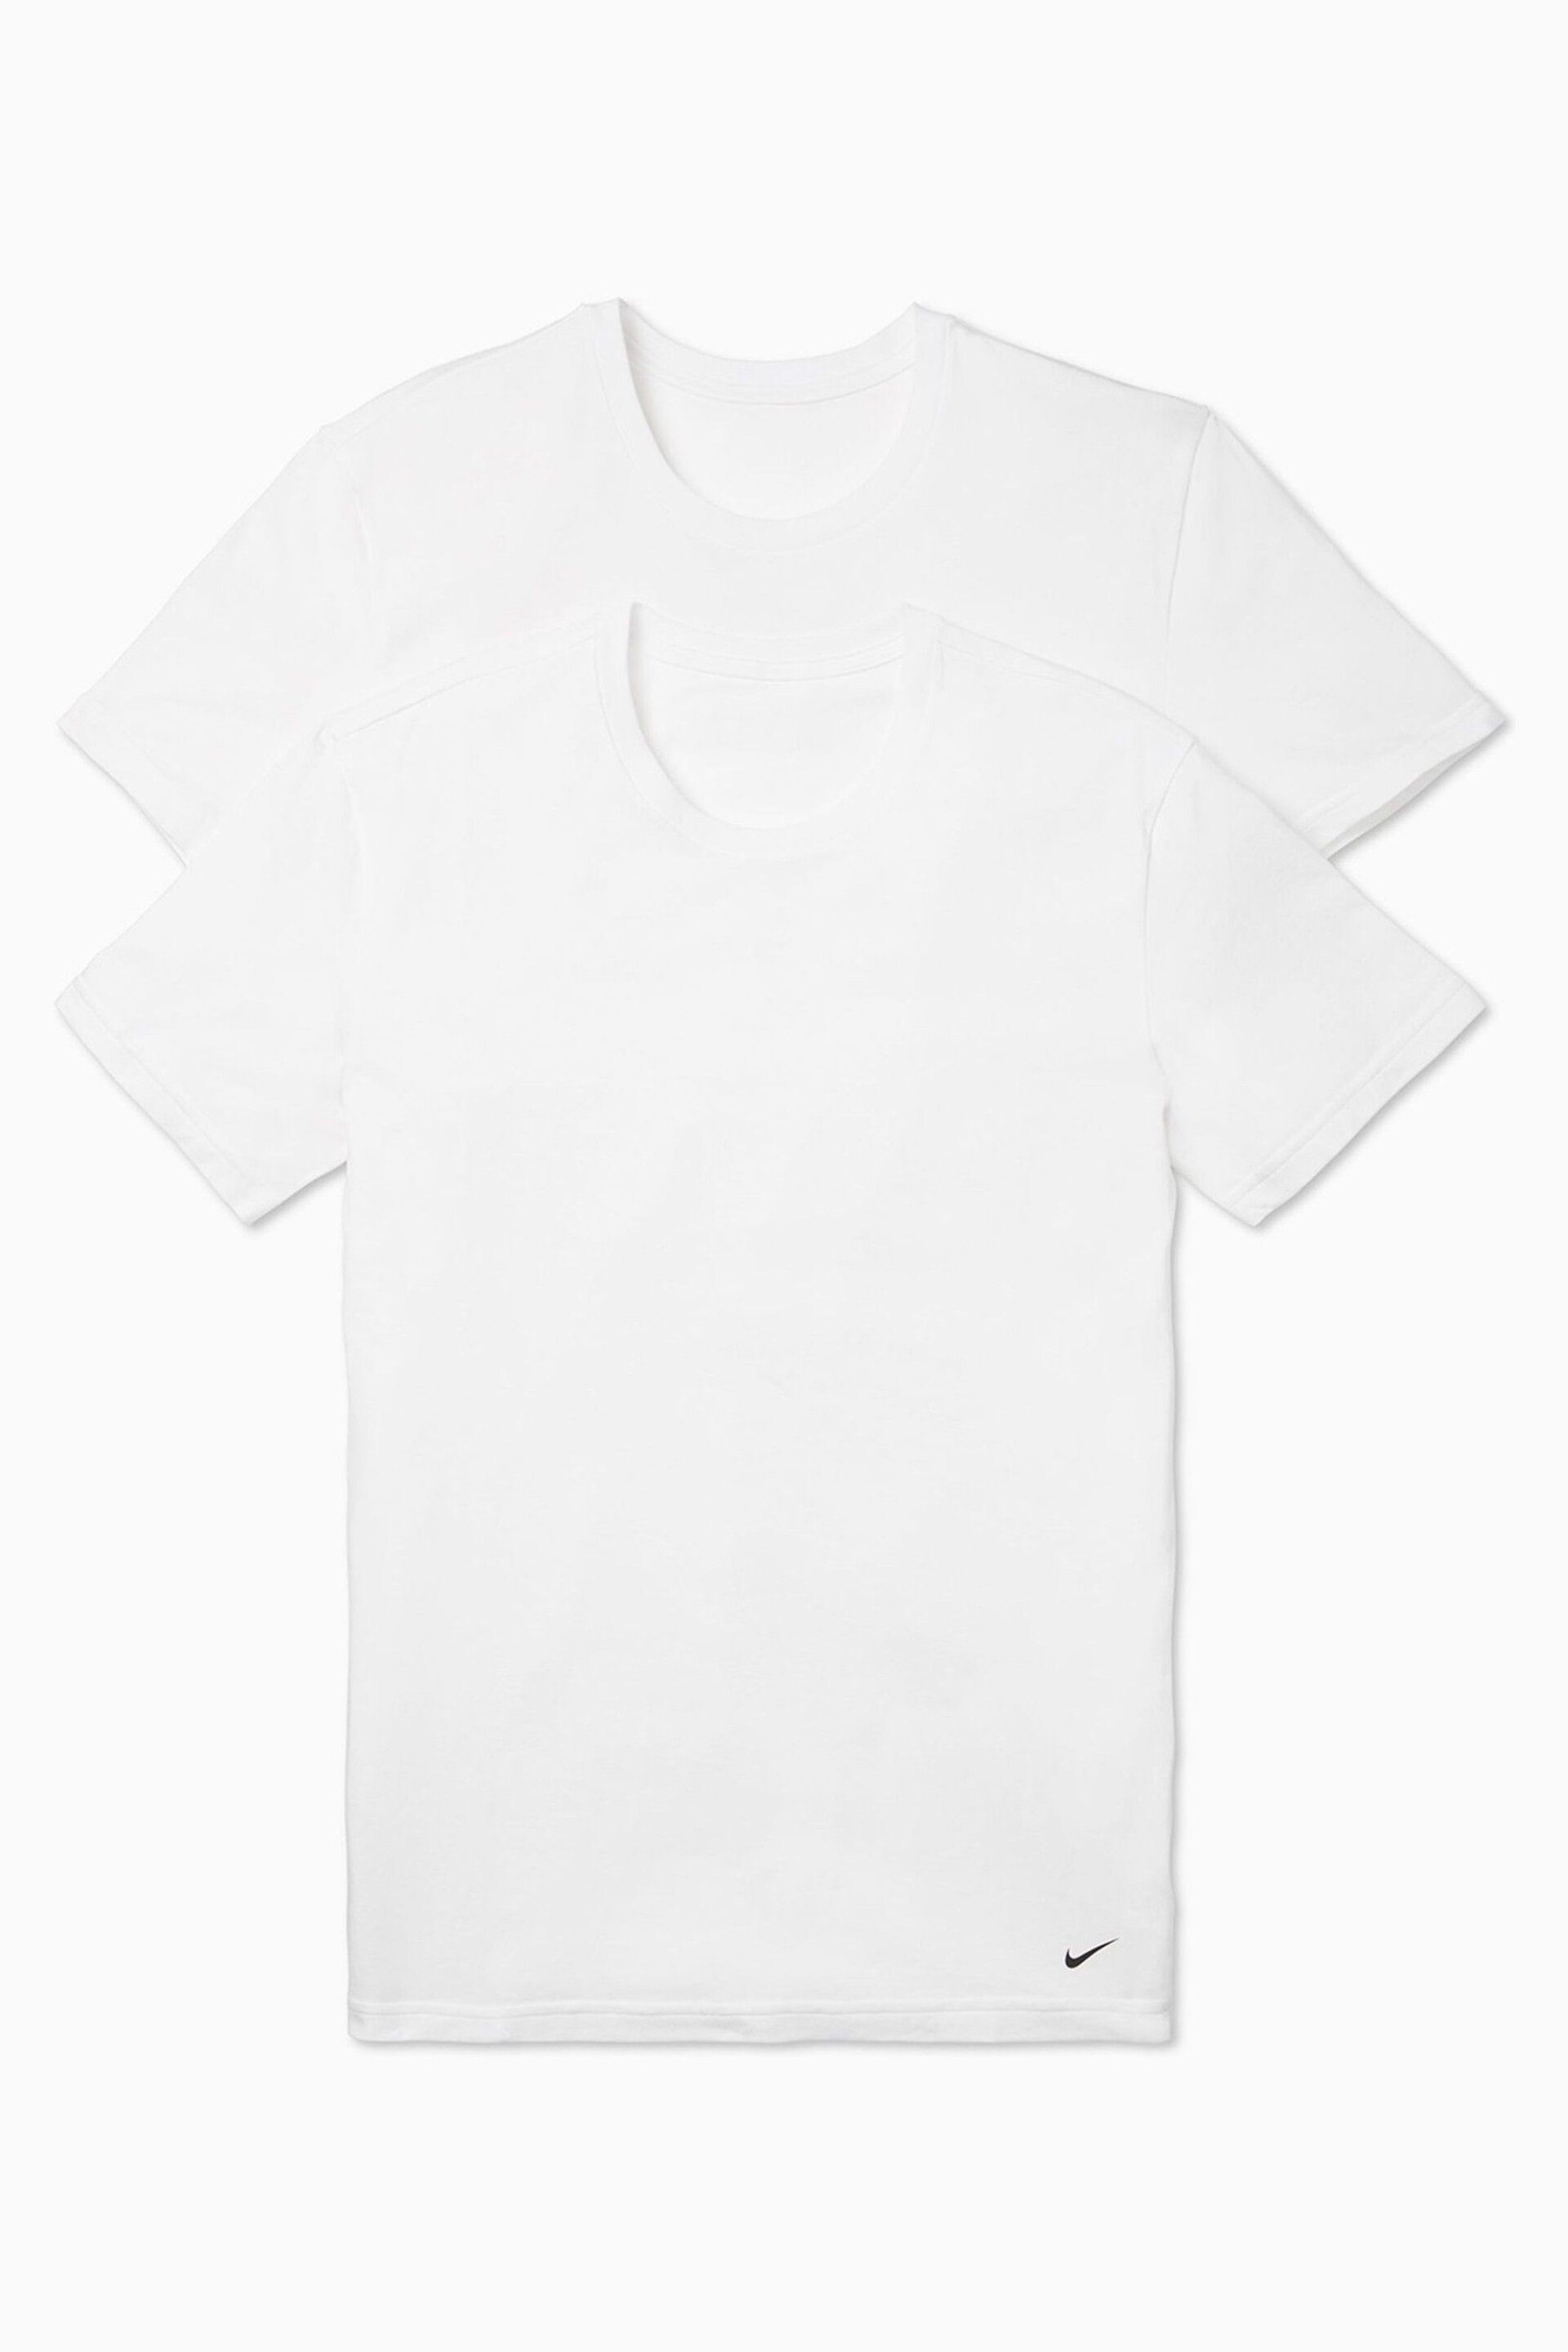 Nike White Everyday Cotton Stretch T-Shirts 2 Pack - Image 2 of 2